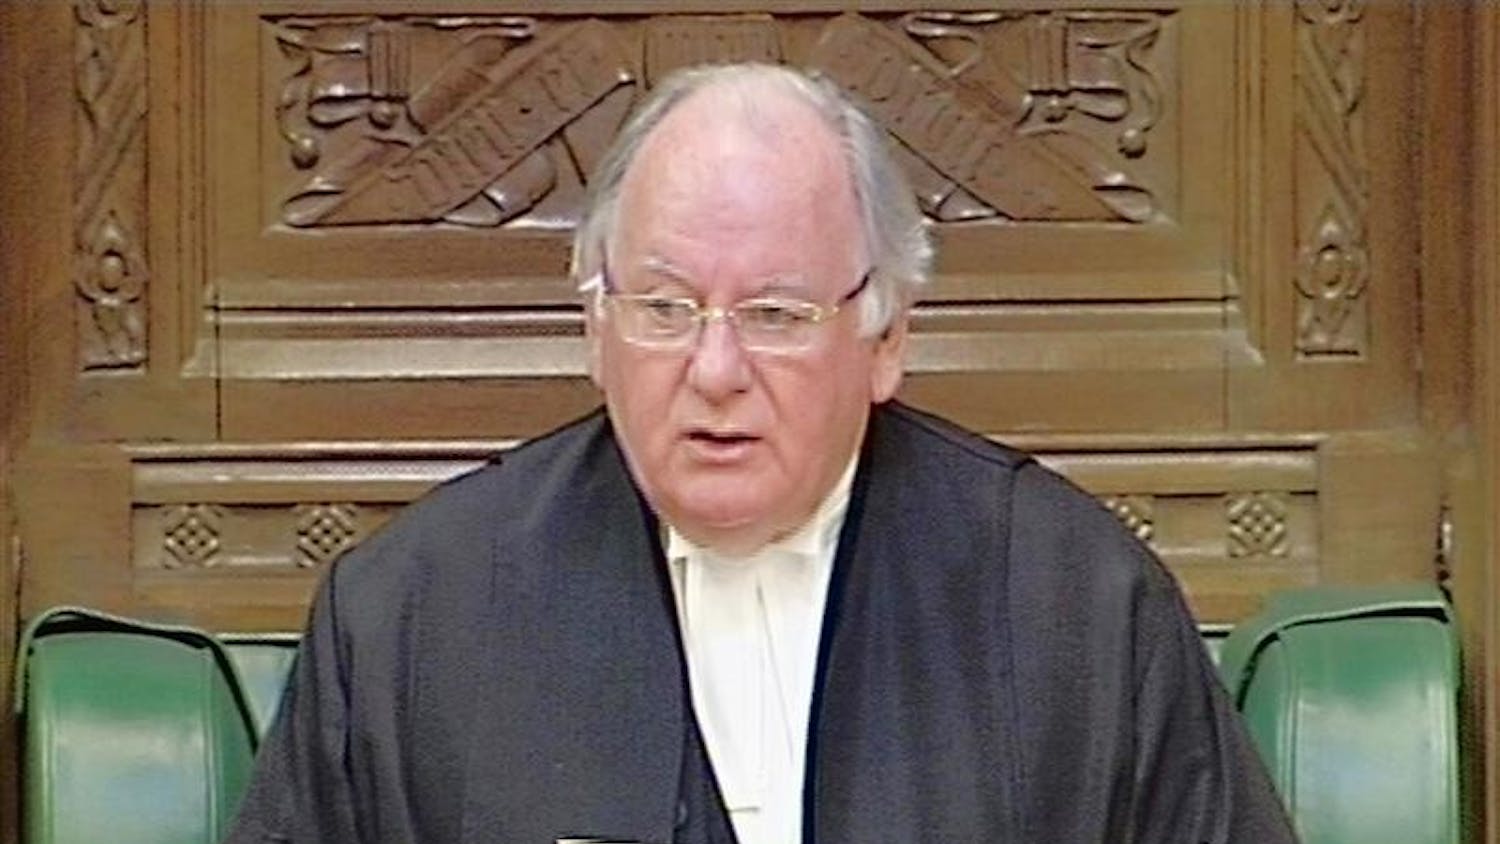 Speaker of the House of Commons Michael Martin reads a statement to the House of Commons in London in this image taken from TV  Monday May 18, 2009. Martin said Monday he was "profoundly sorry" for the handling of Members of Parliament expenses, saying the public had been let down "very badly indeed.